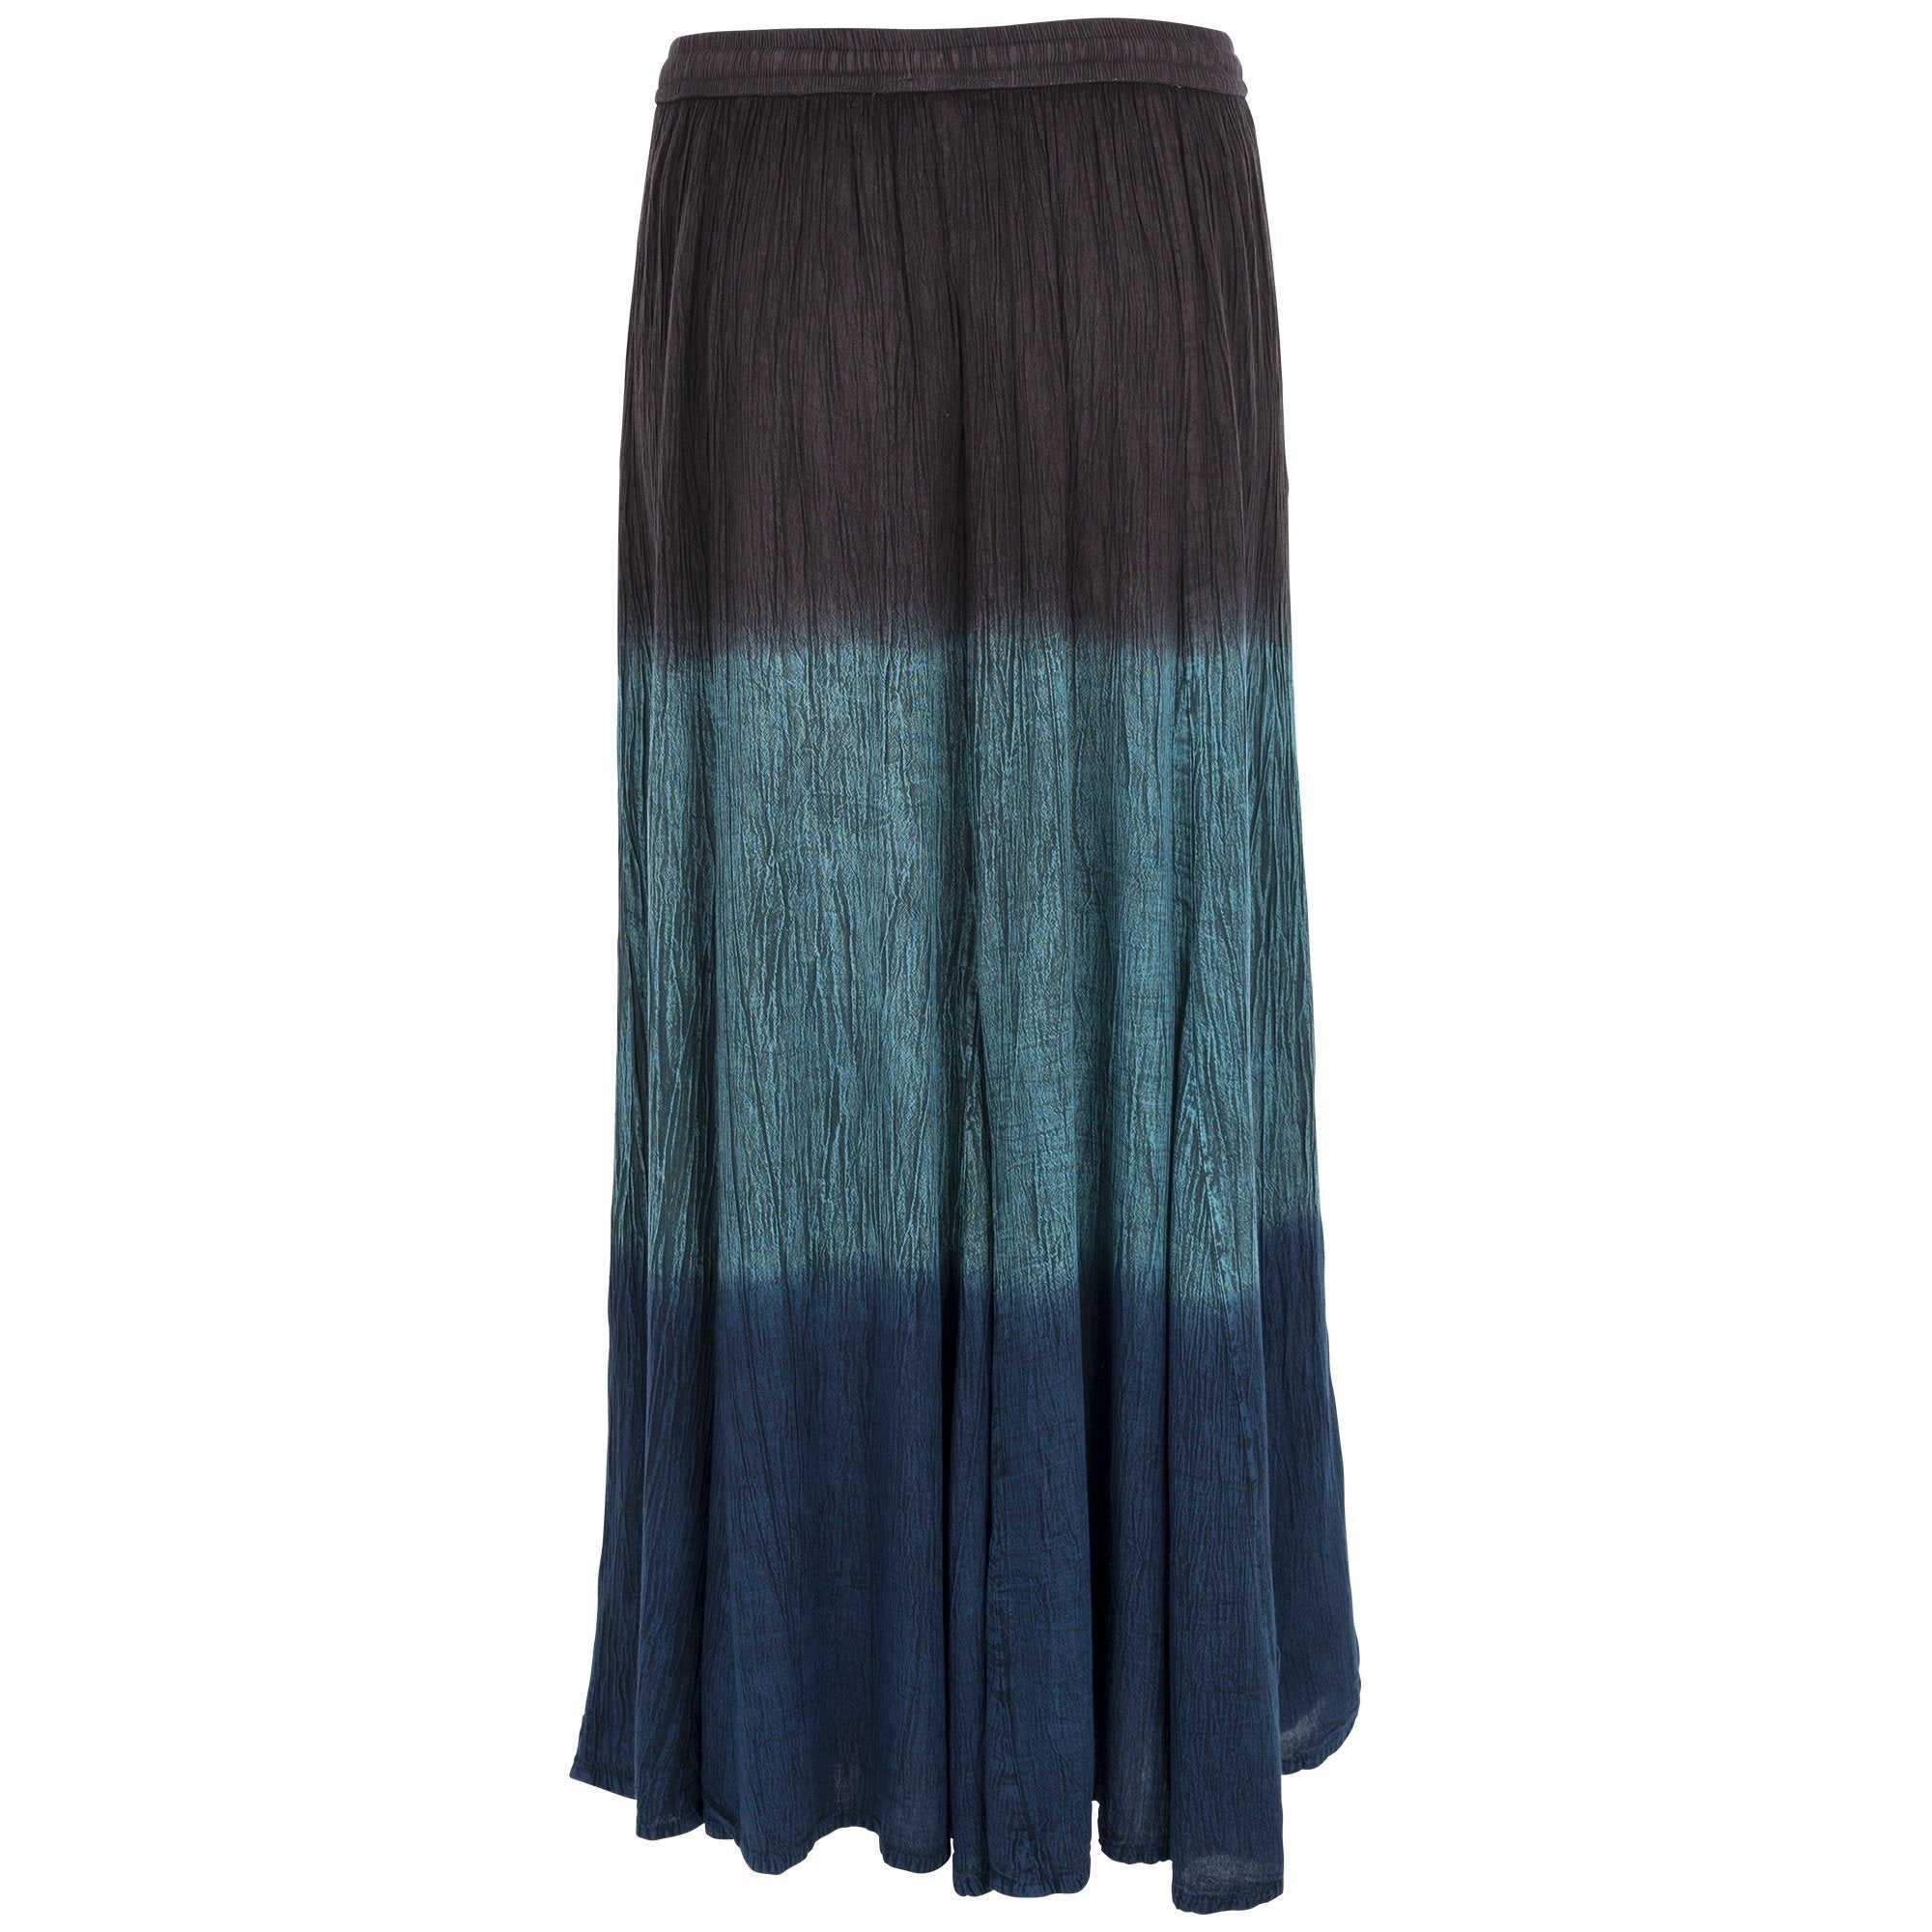 Earth & Sky Maxi Skirt | The Animal Rescue Site